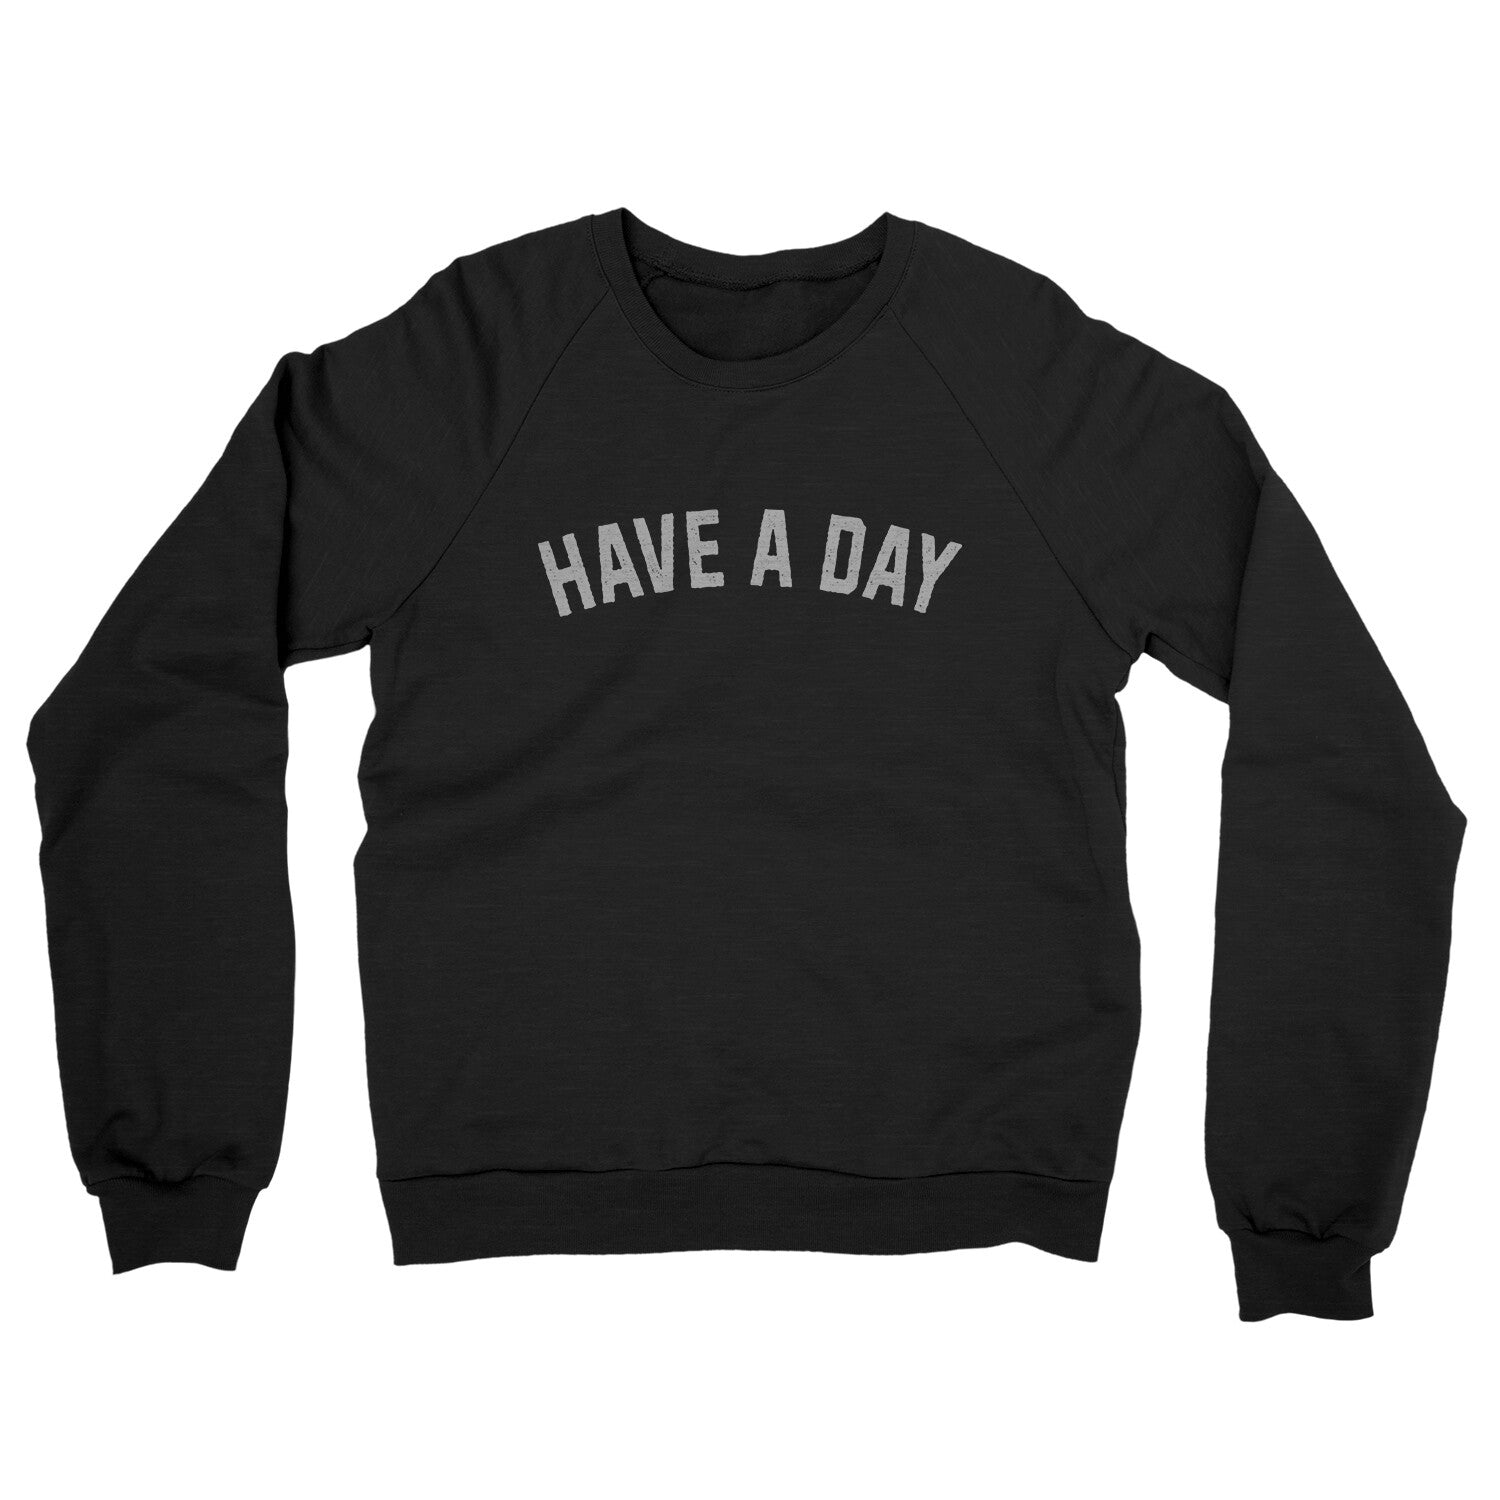 Have a Day in Black Color